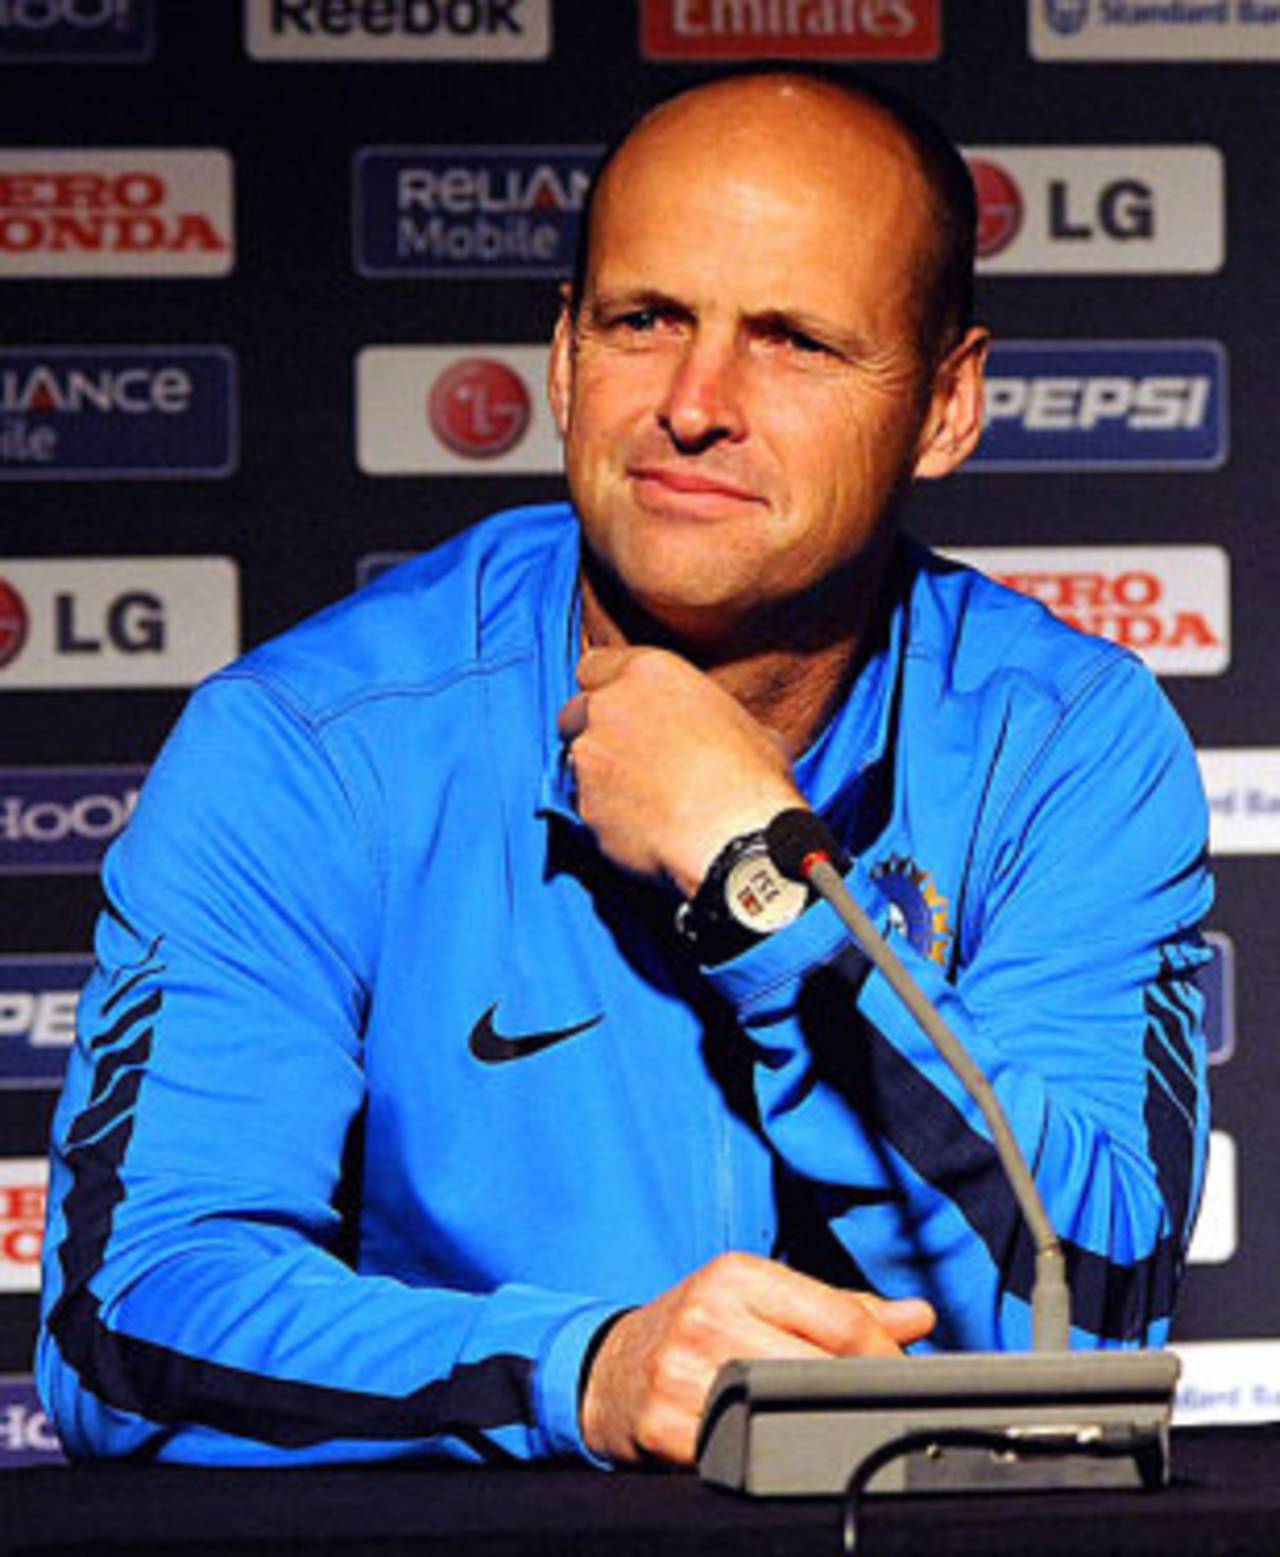 Gary Kirsten takes questions from the media, Johannesburg, September 19, 2009